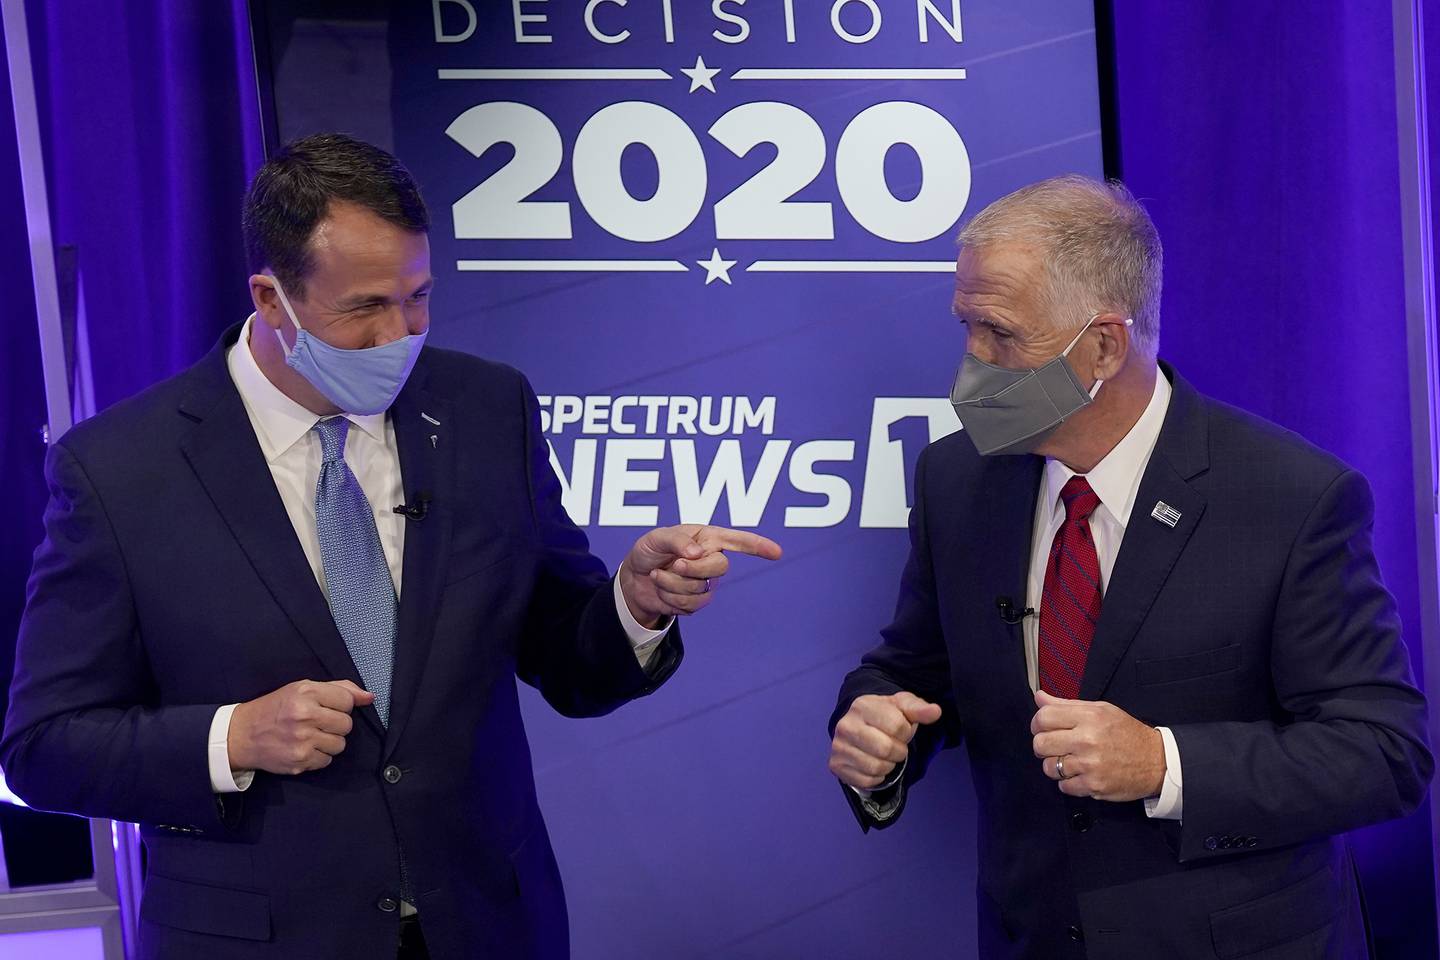 Democratic challenger Cal Cunningham, left, and U.S. Sen. Thom Tillis, R-N.C. greet each other after a televised debate Oct. 1, 2020, in Raleigh, N.C.